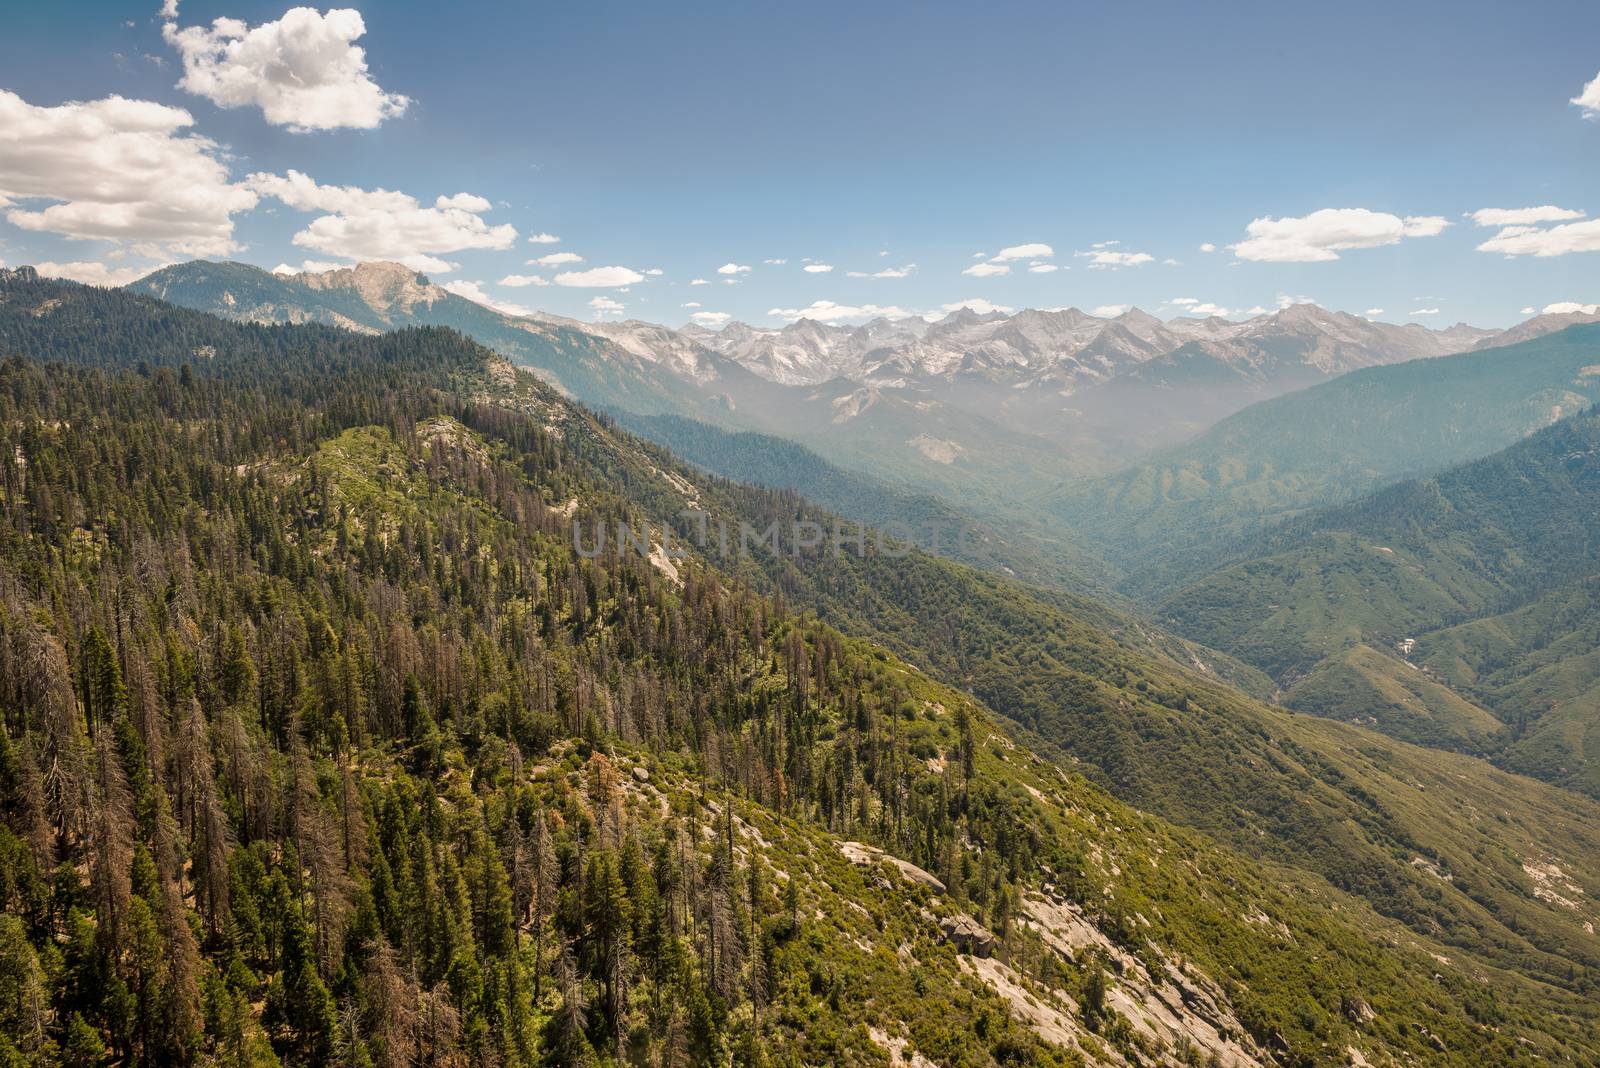 View from Moro Rock in Sequoia National Park, California by Njean